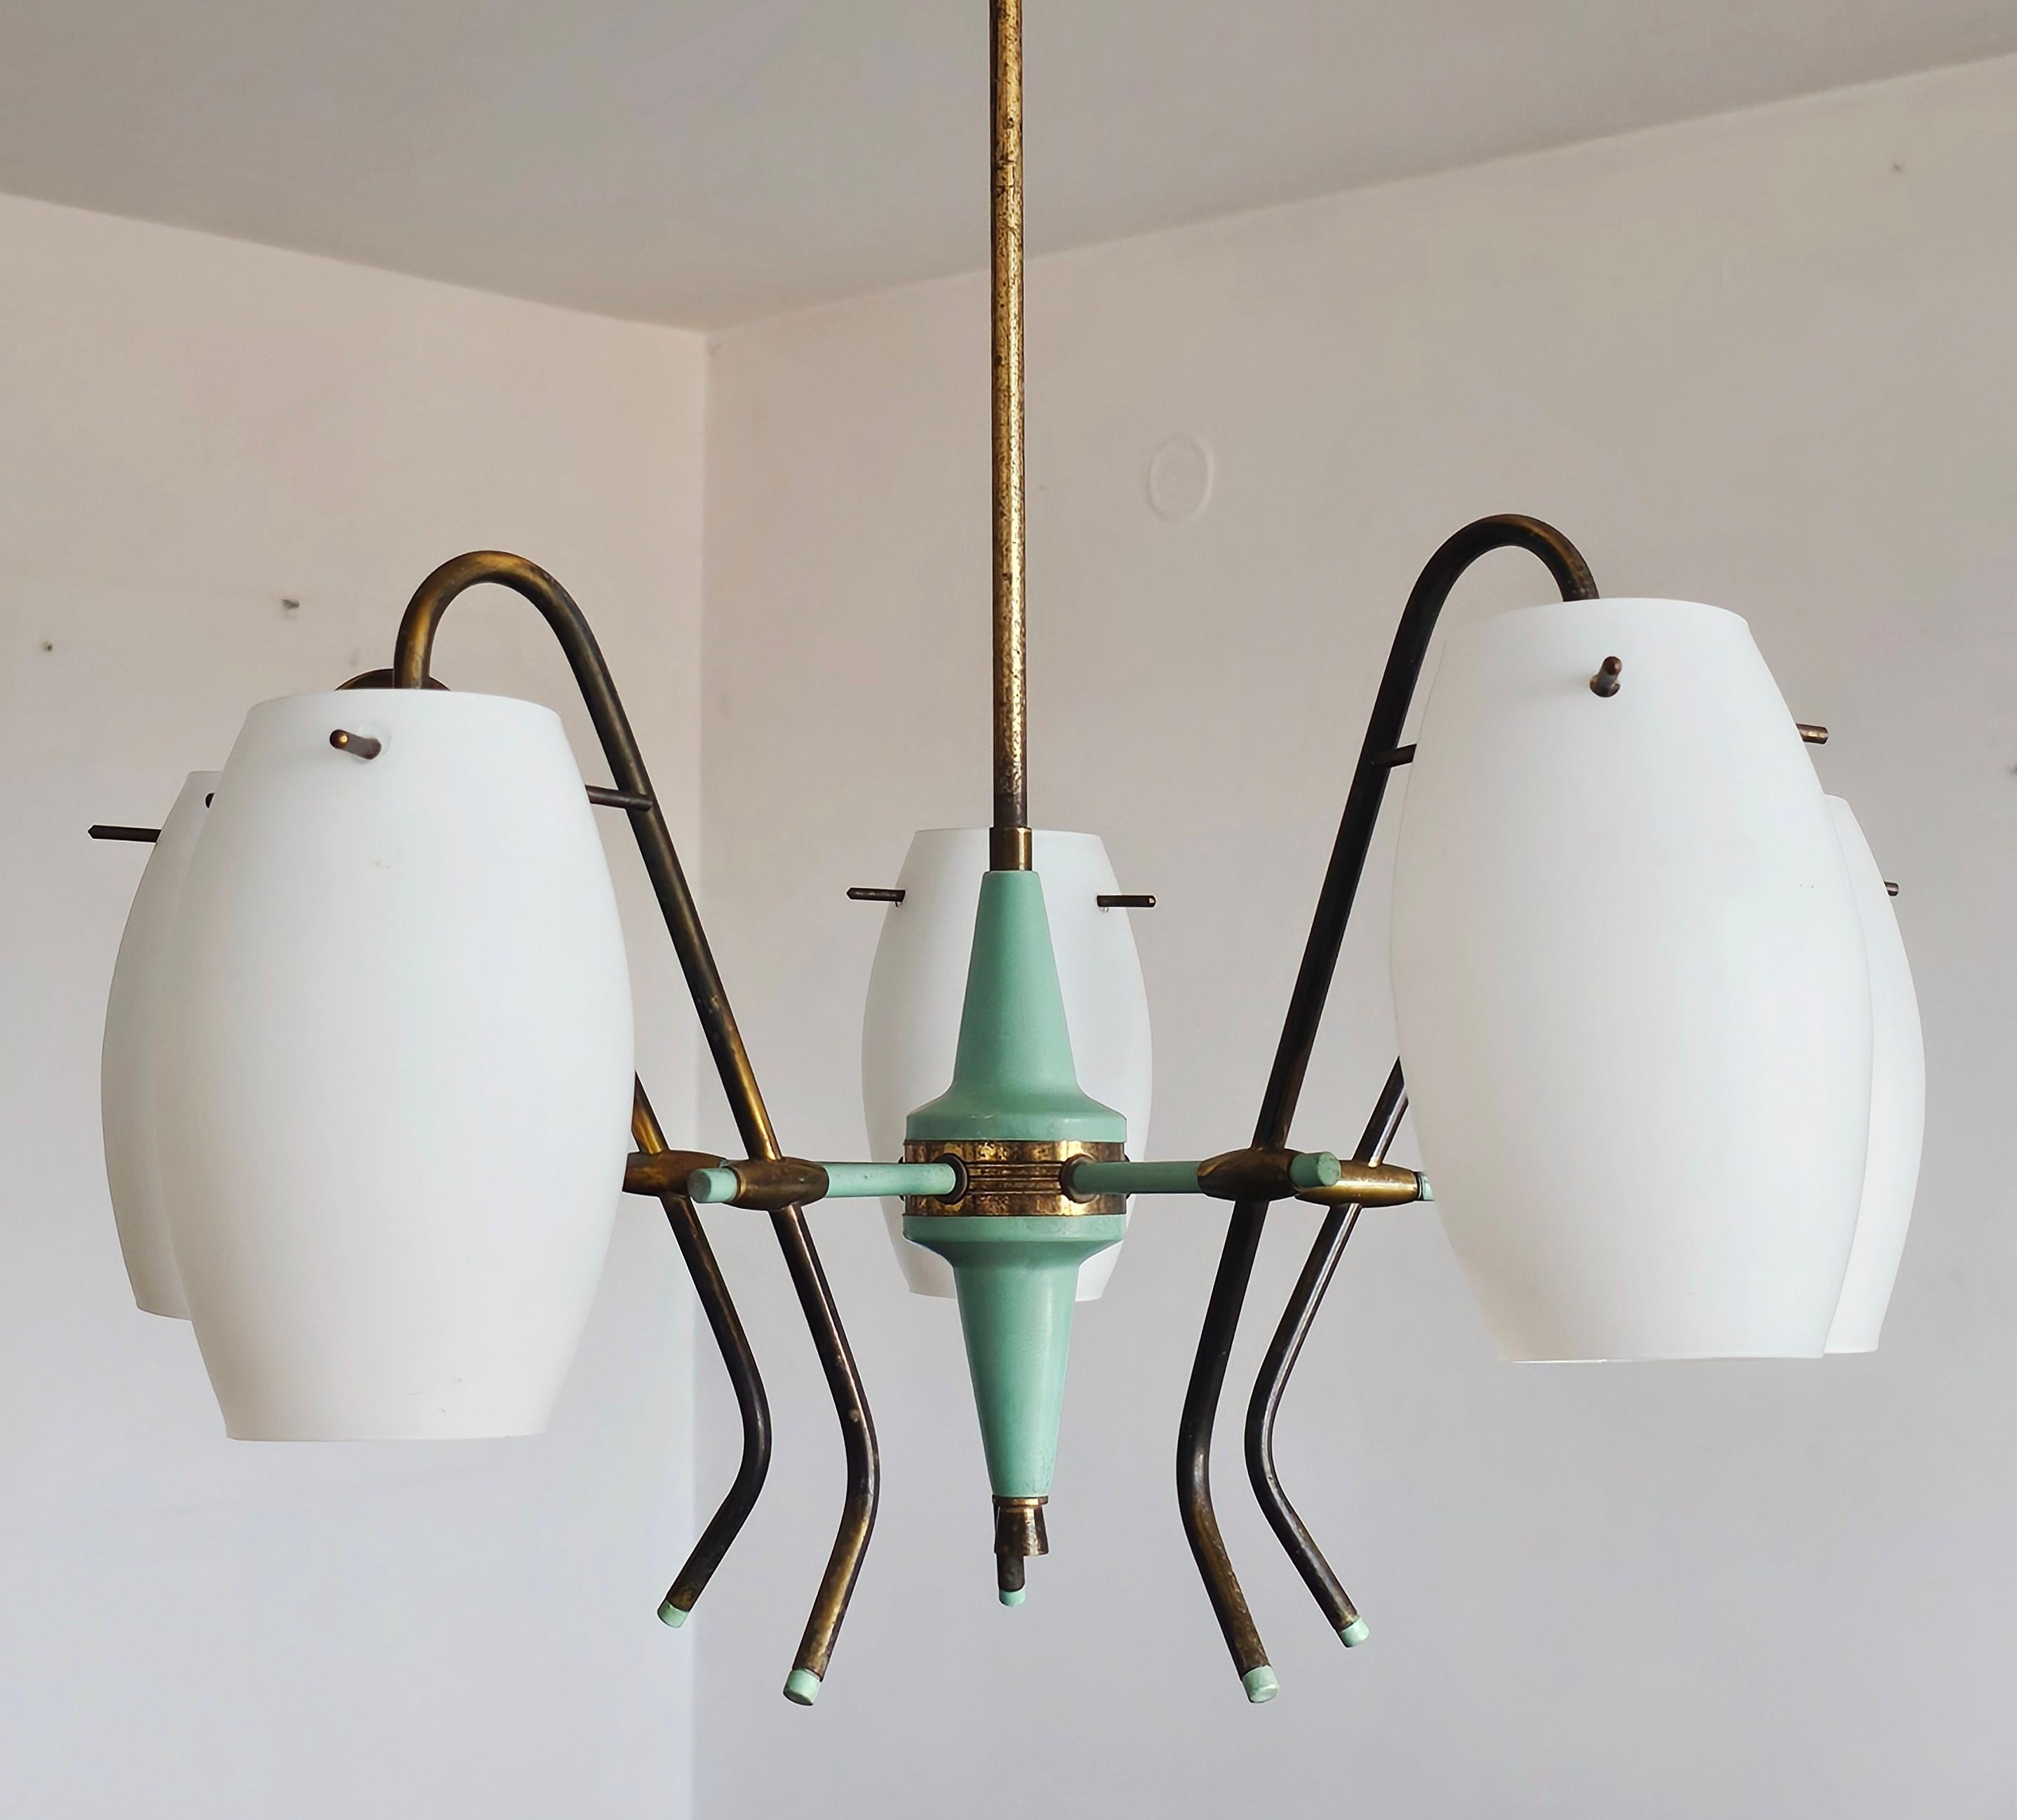 In this listing you will find a very rare 5-arm Mid Century Modern chandelier manufactured by Stilux Milano, the main competitor of Stilnovo throughout 1950s and 1960s. Chandelier features a fixture in turquoise/green and brass, while the shades are